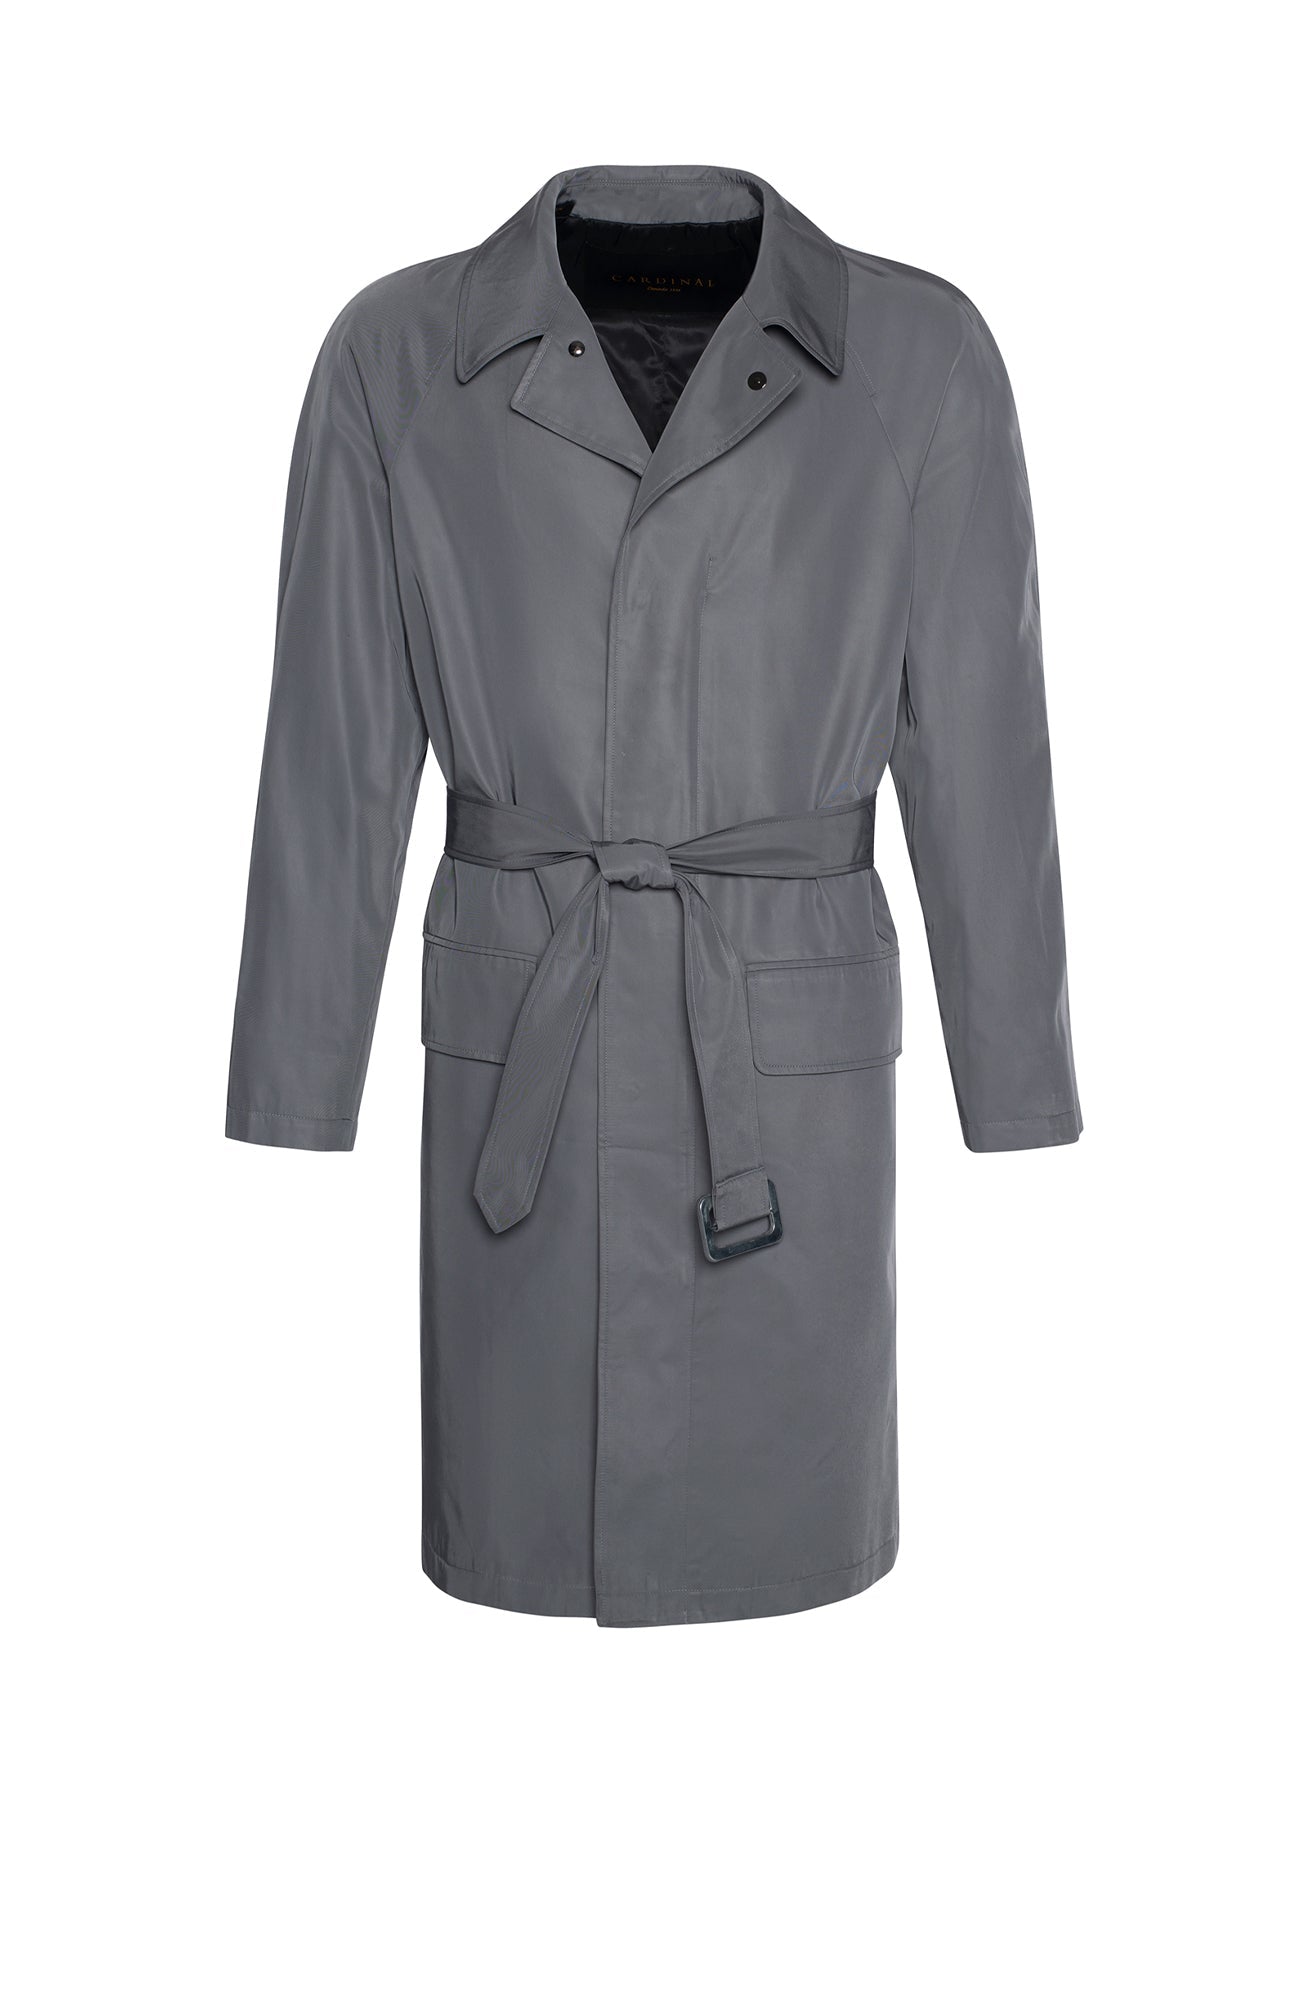 LIMITED EDITION: COLE GREY BELTED RAINCOAT - MENS - Cardinal of Canada-CA - LIMITED EDITION: COLE GREY BELTED RAINCOAT 41 INCH LENGTH